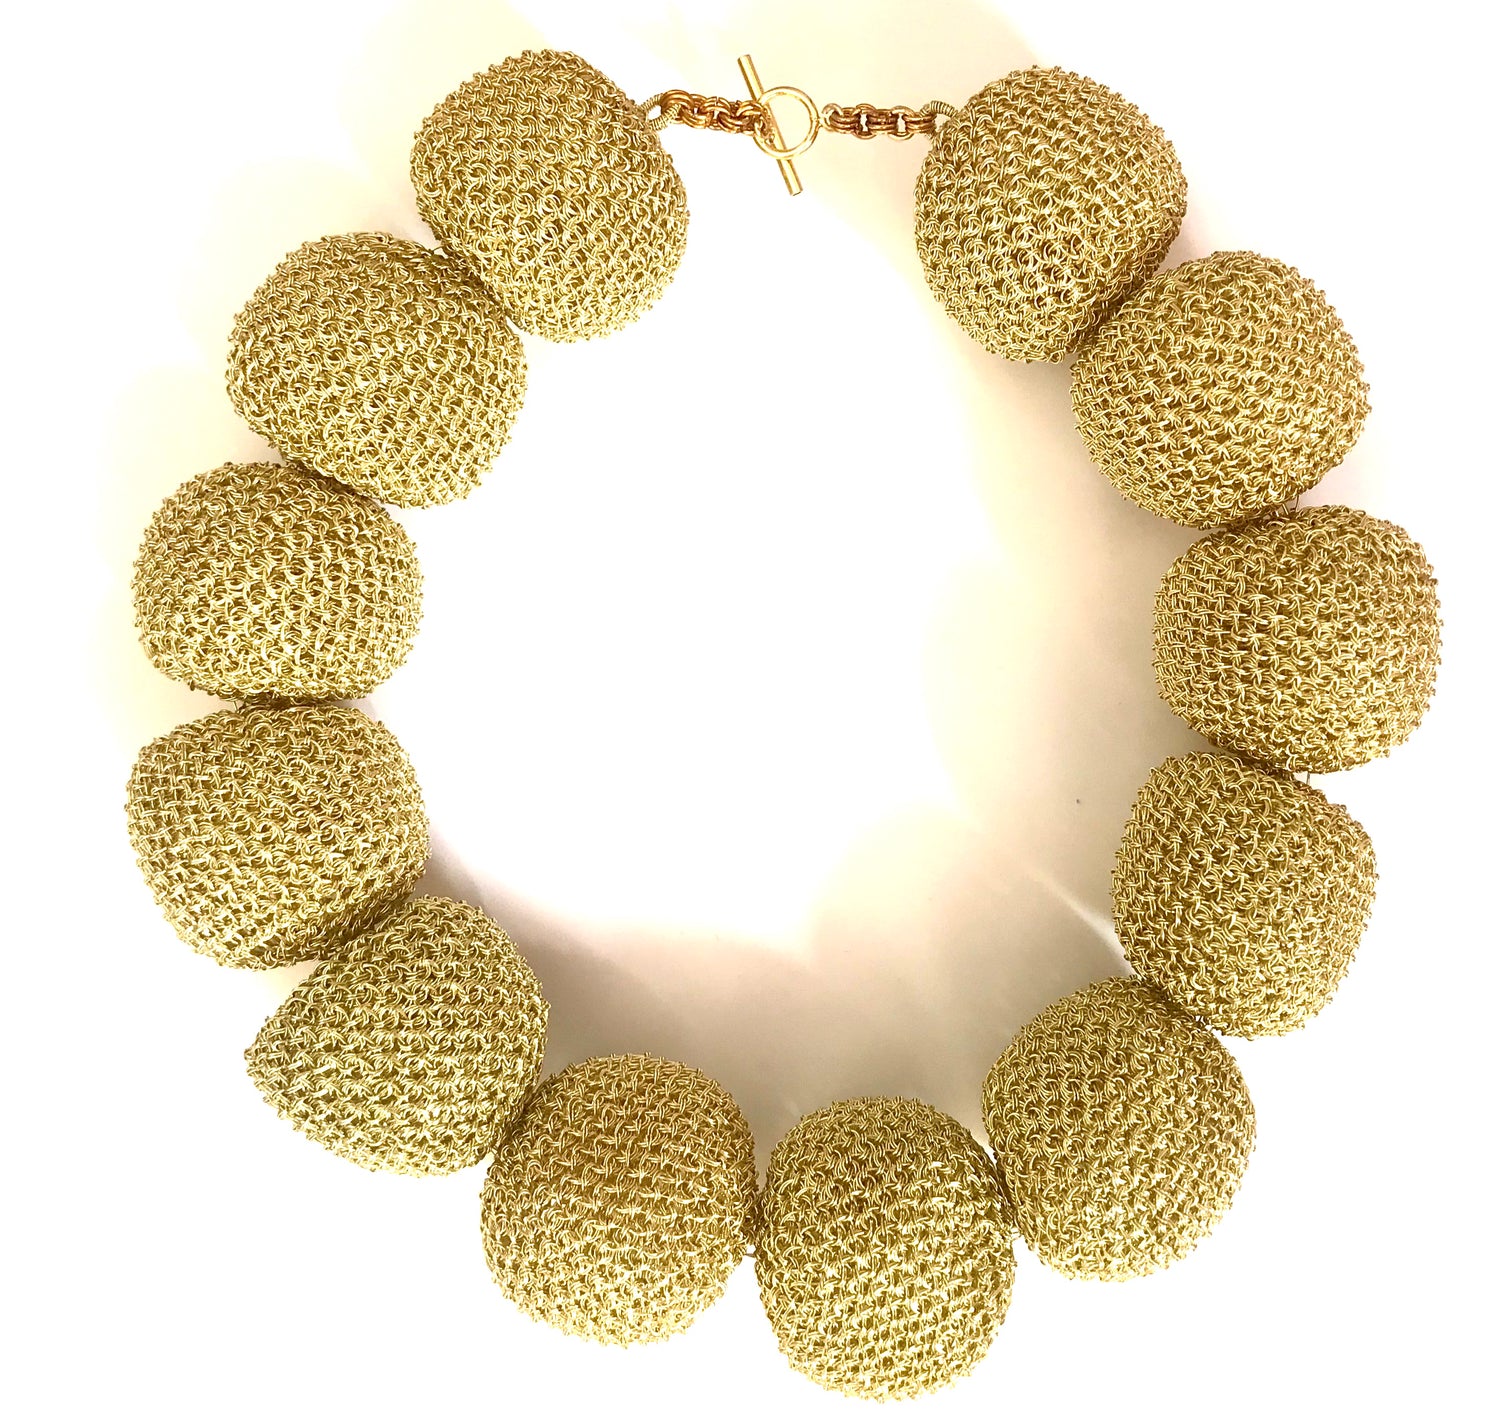 Unique, one of a kind, handcrafted statement Perle D'Oro necklace from Venice collection. The necklace is made of oversized gold-plated wire pearls.  Venice collection is designed in Stockholm, Sweden and inspired by the beauty and traditions of Venetian culture. It brings together the Scandinavian aesthetics and its tendency towards simplicity with the allure and colourful, sophisticated lavishness of Venice. 